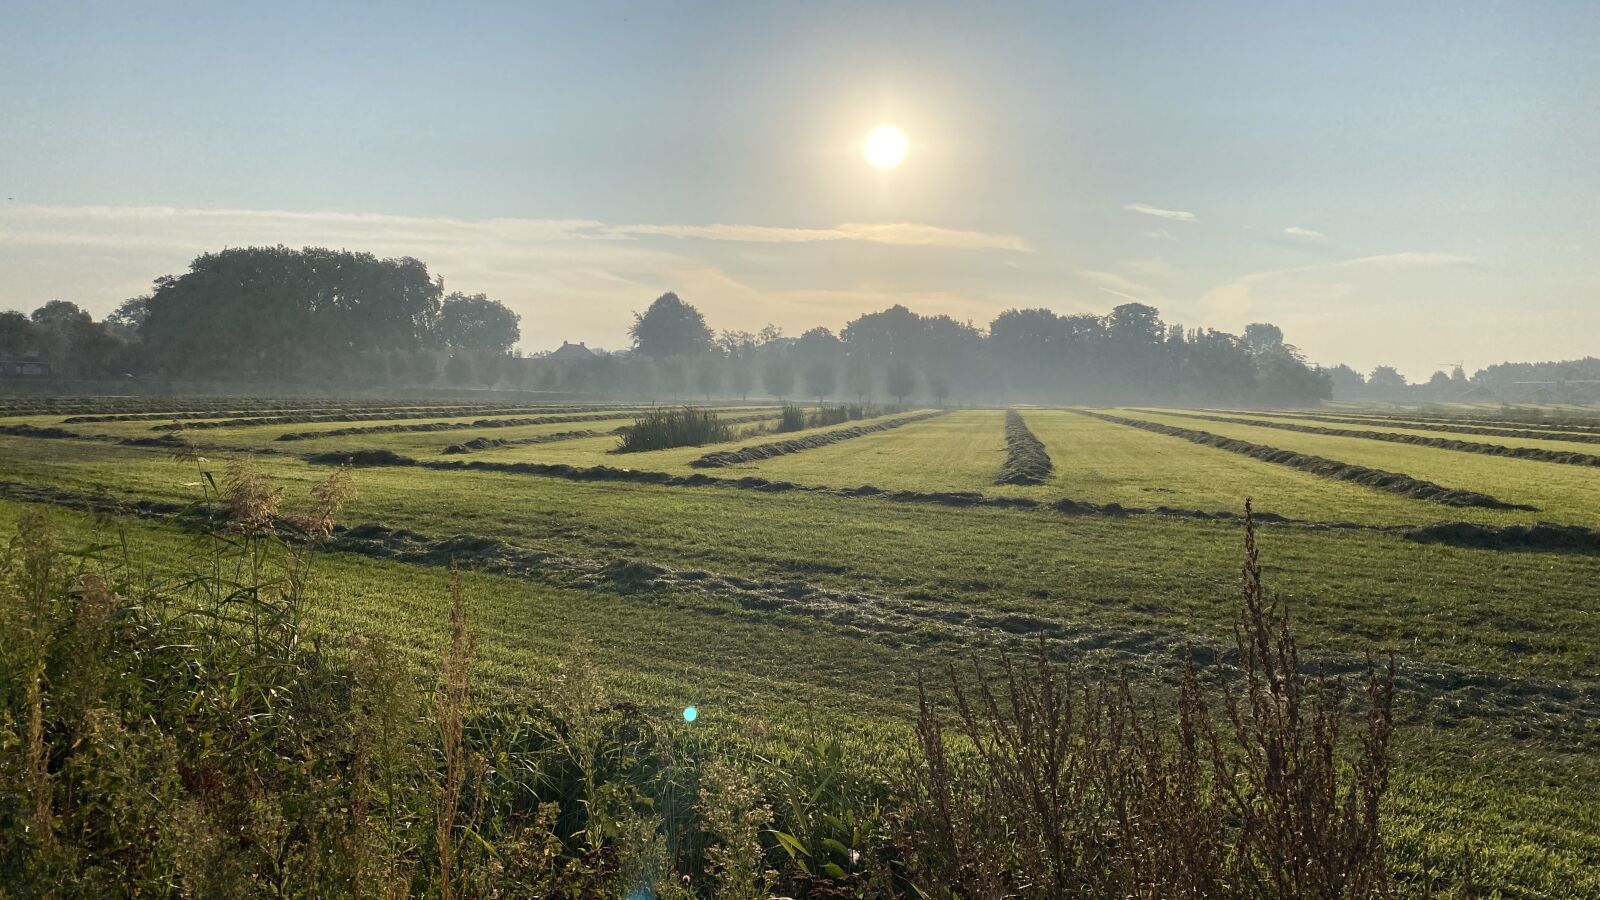 iPhone 11 back dual wide camera 4.25mm f/1.8 sample photo. Field, morning, sunrise photography